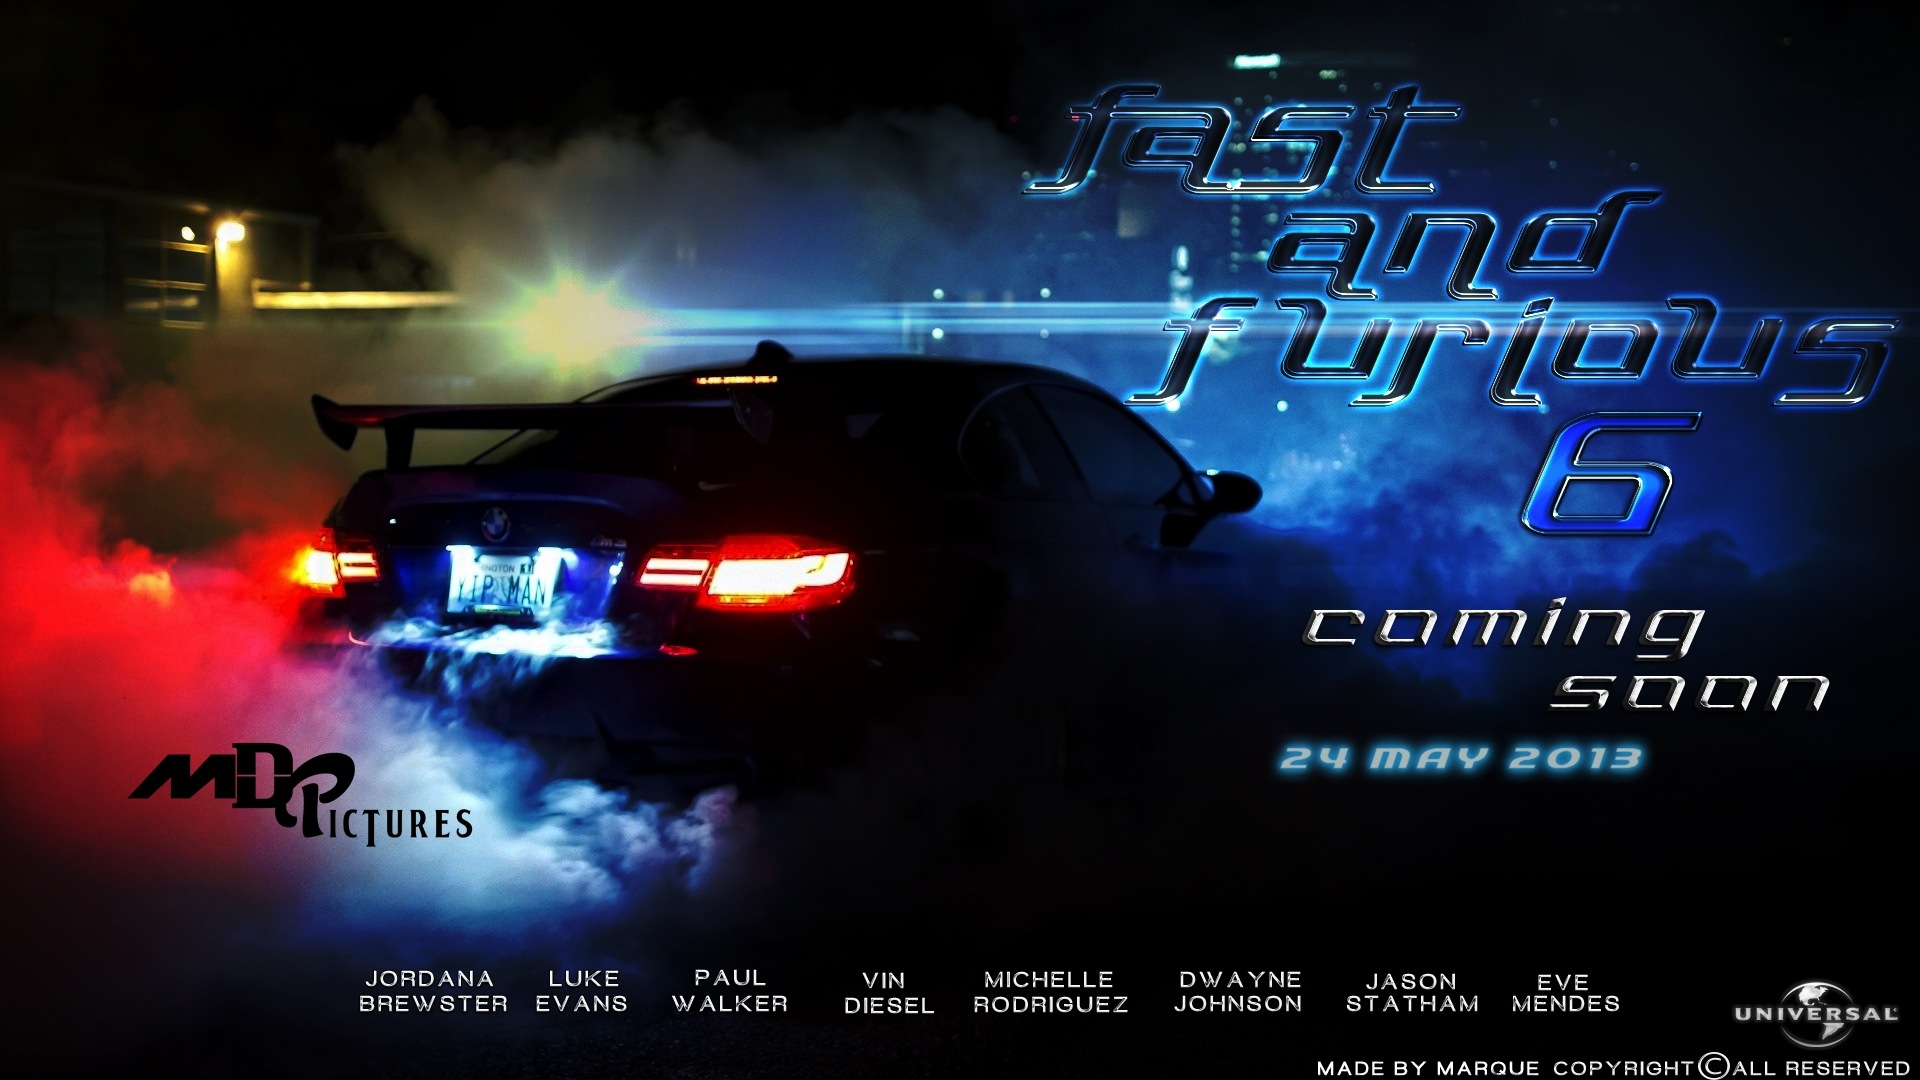 Fast And Furious 6 HD movie wallpapers #3 - 1920x1080